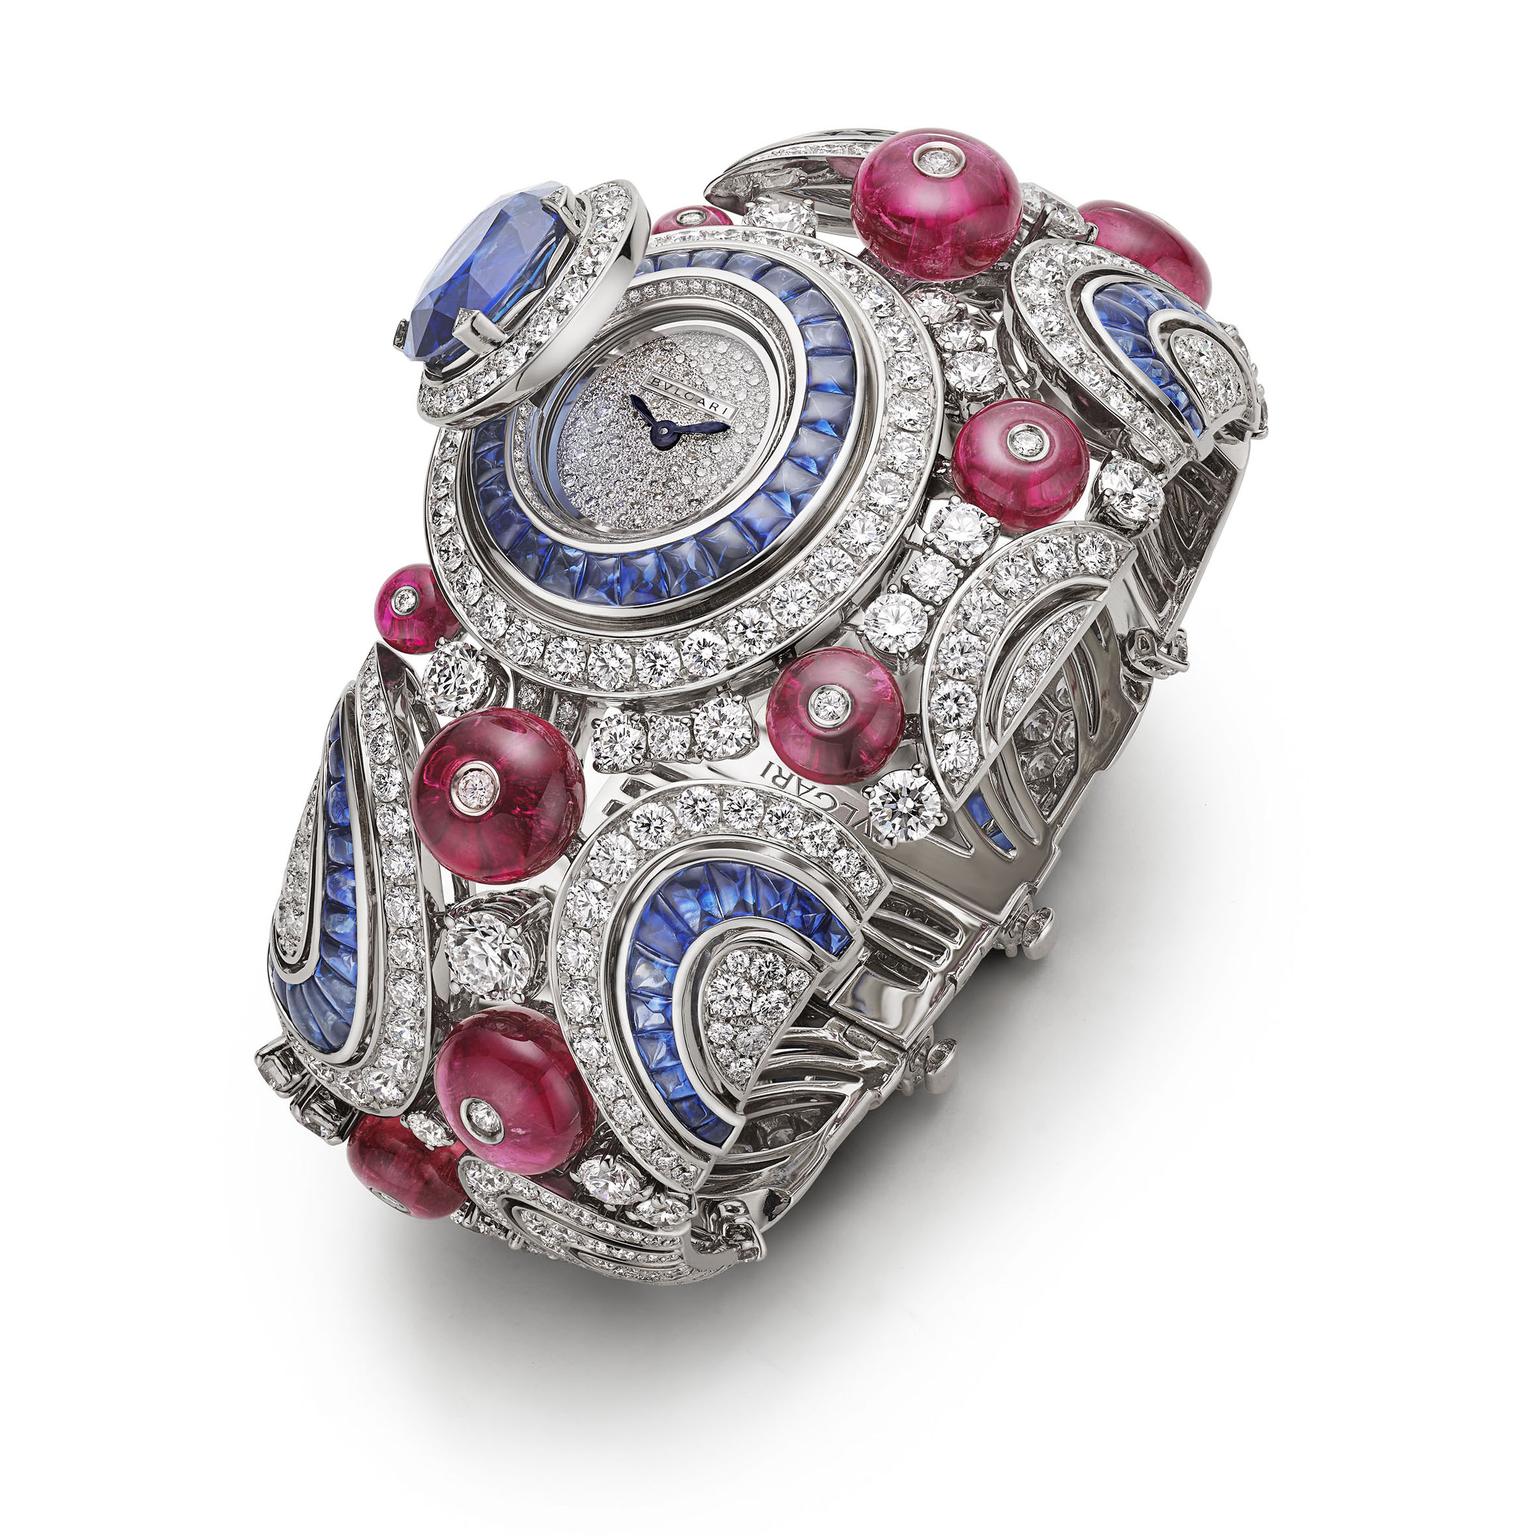 Bulgari Goes For Baroque With Latest High Jewelry Collection